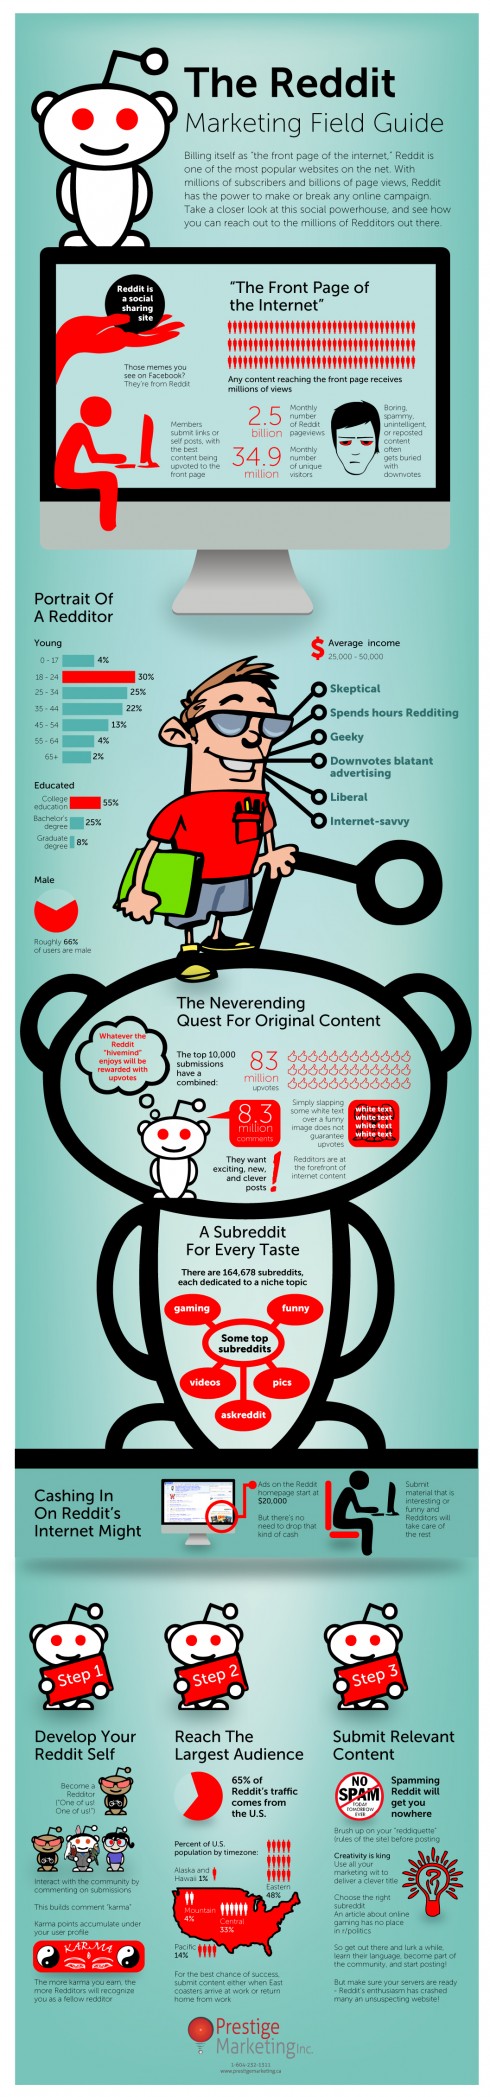 Click to enlarge: Infographic - The Reddit Marketing Field Guide